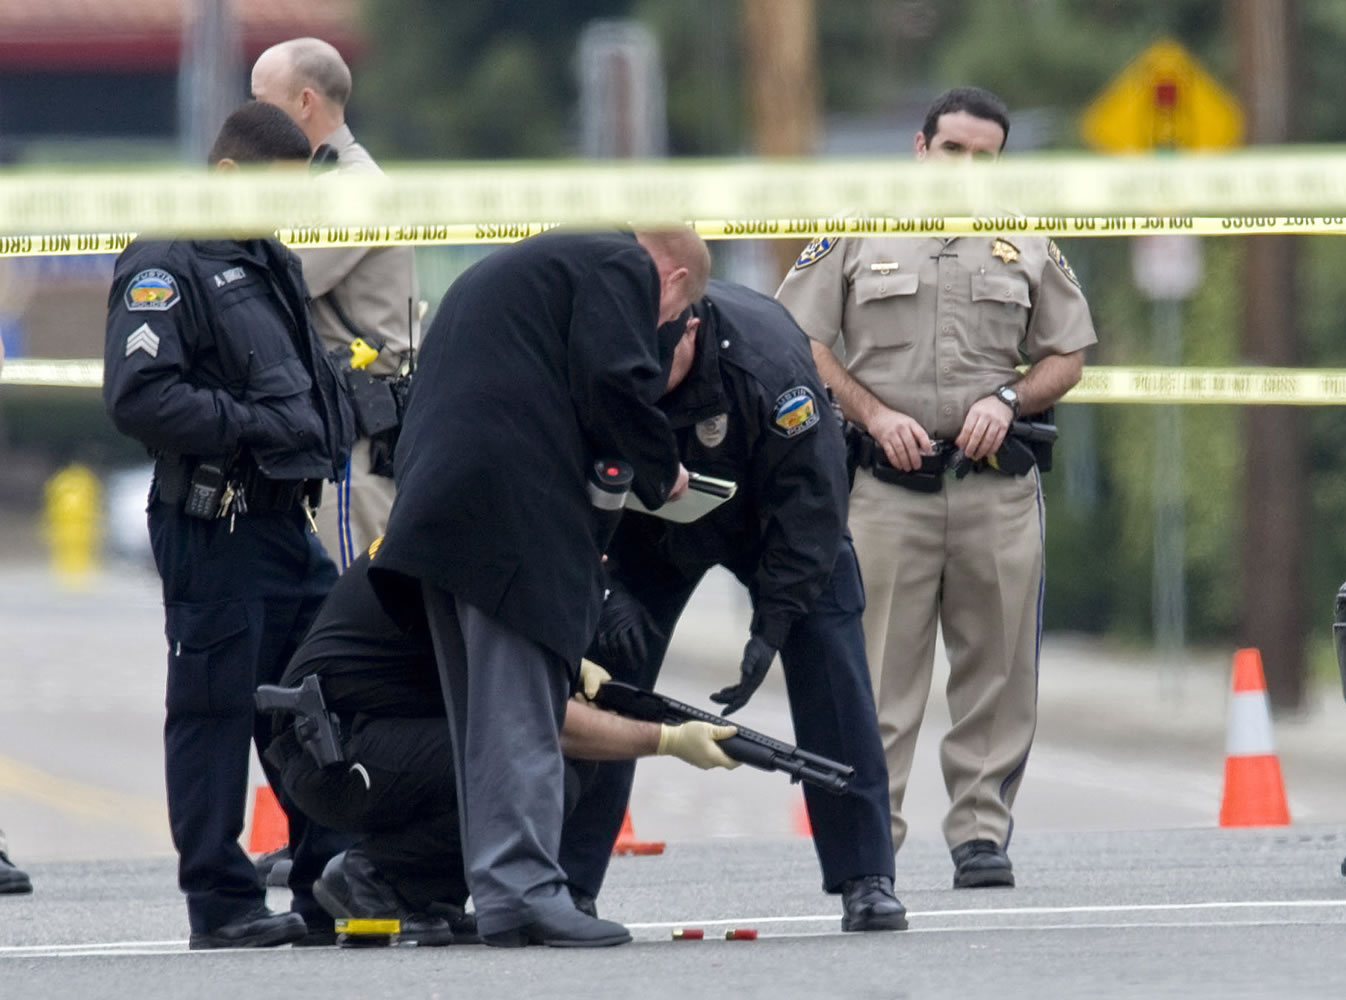 Police investigators examine the scene of a shooting early Tuesday.